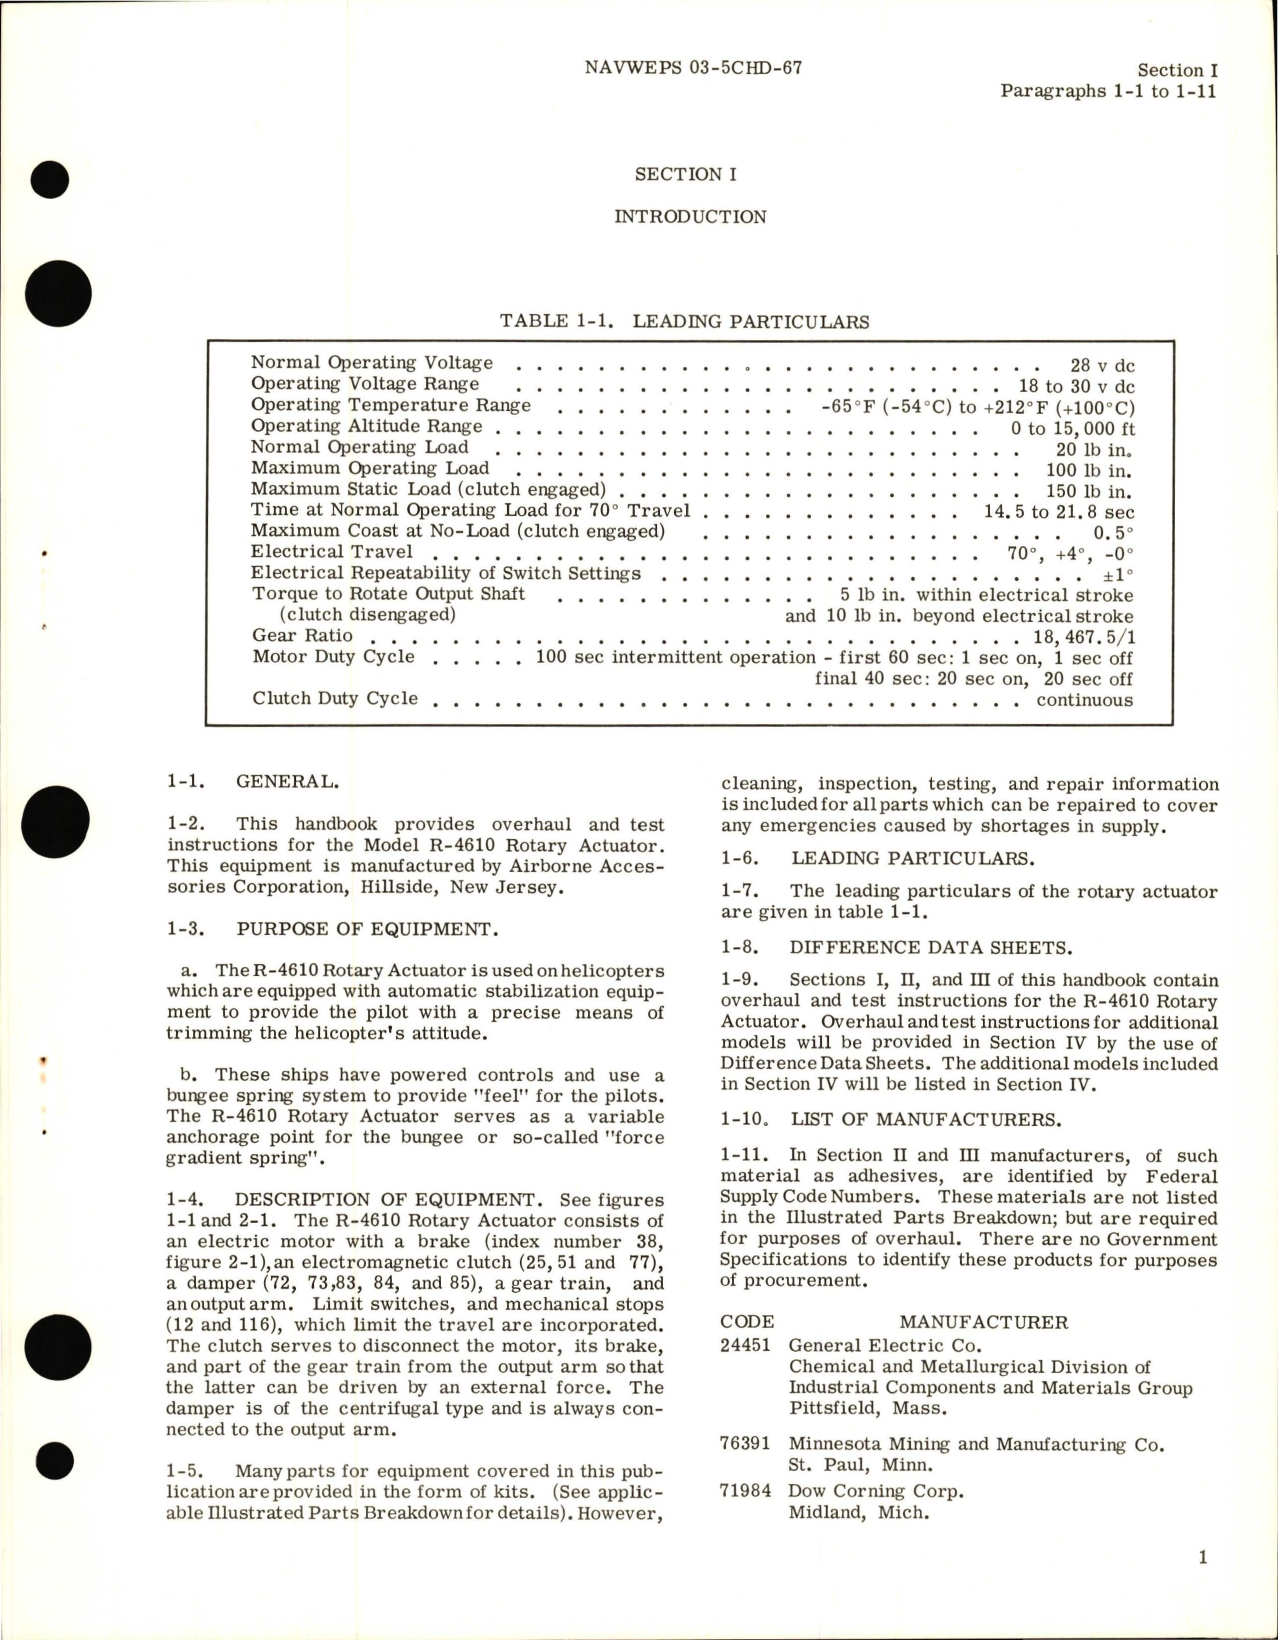 Sample page 5 from AirCorps Library document: Overhaul Instructions for Rotary Actuator Assembly Model R-4610